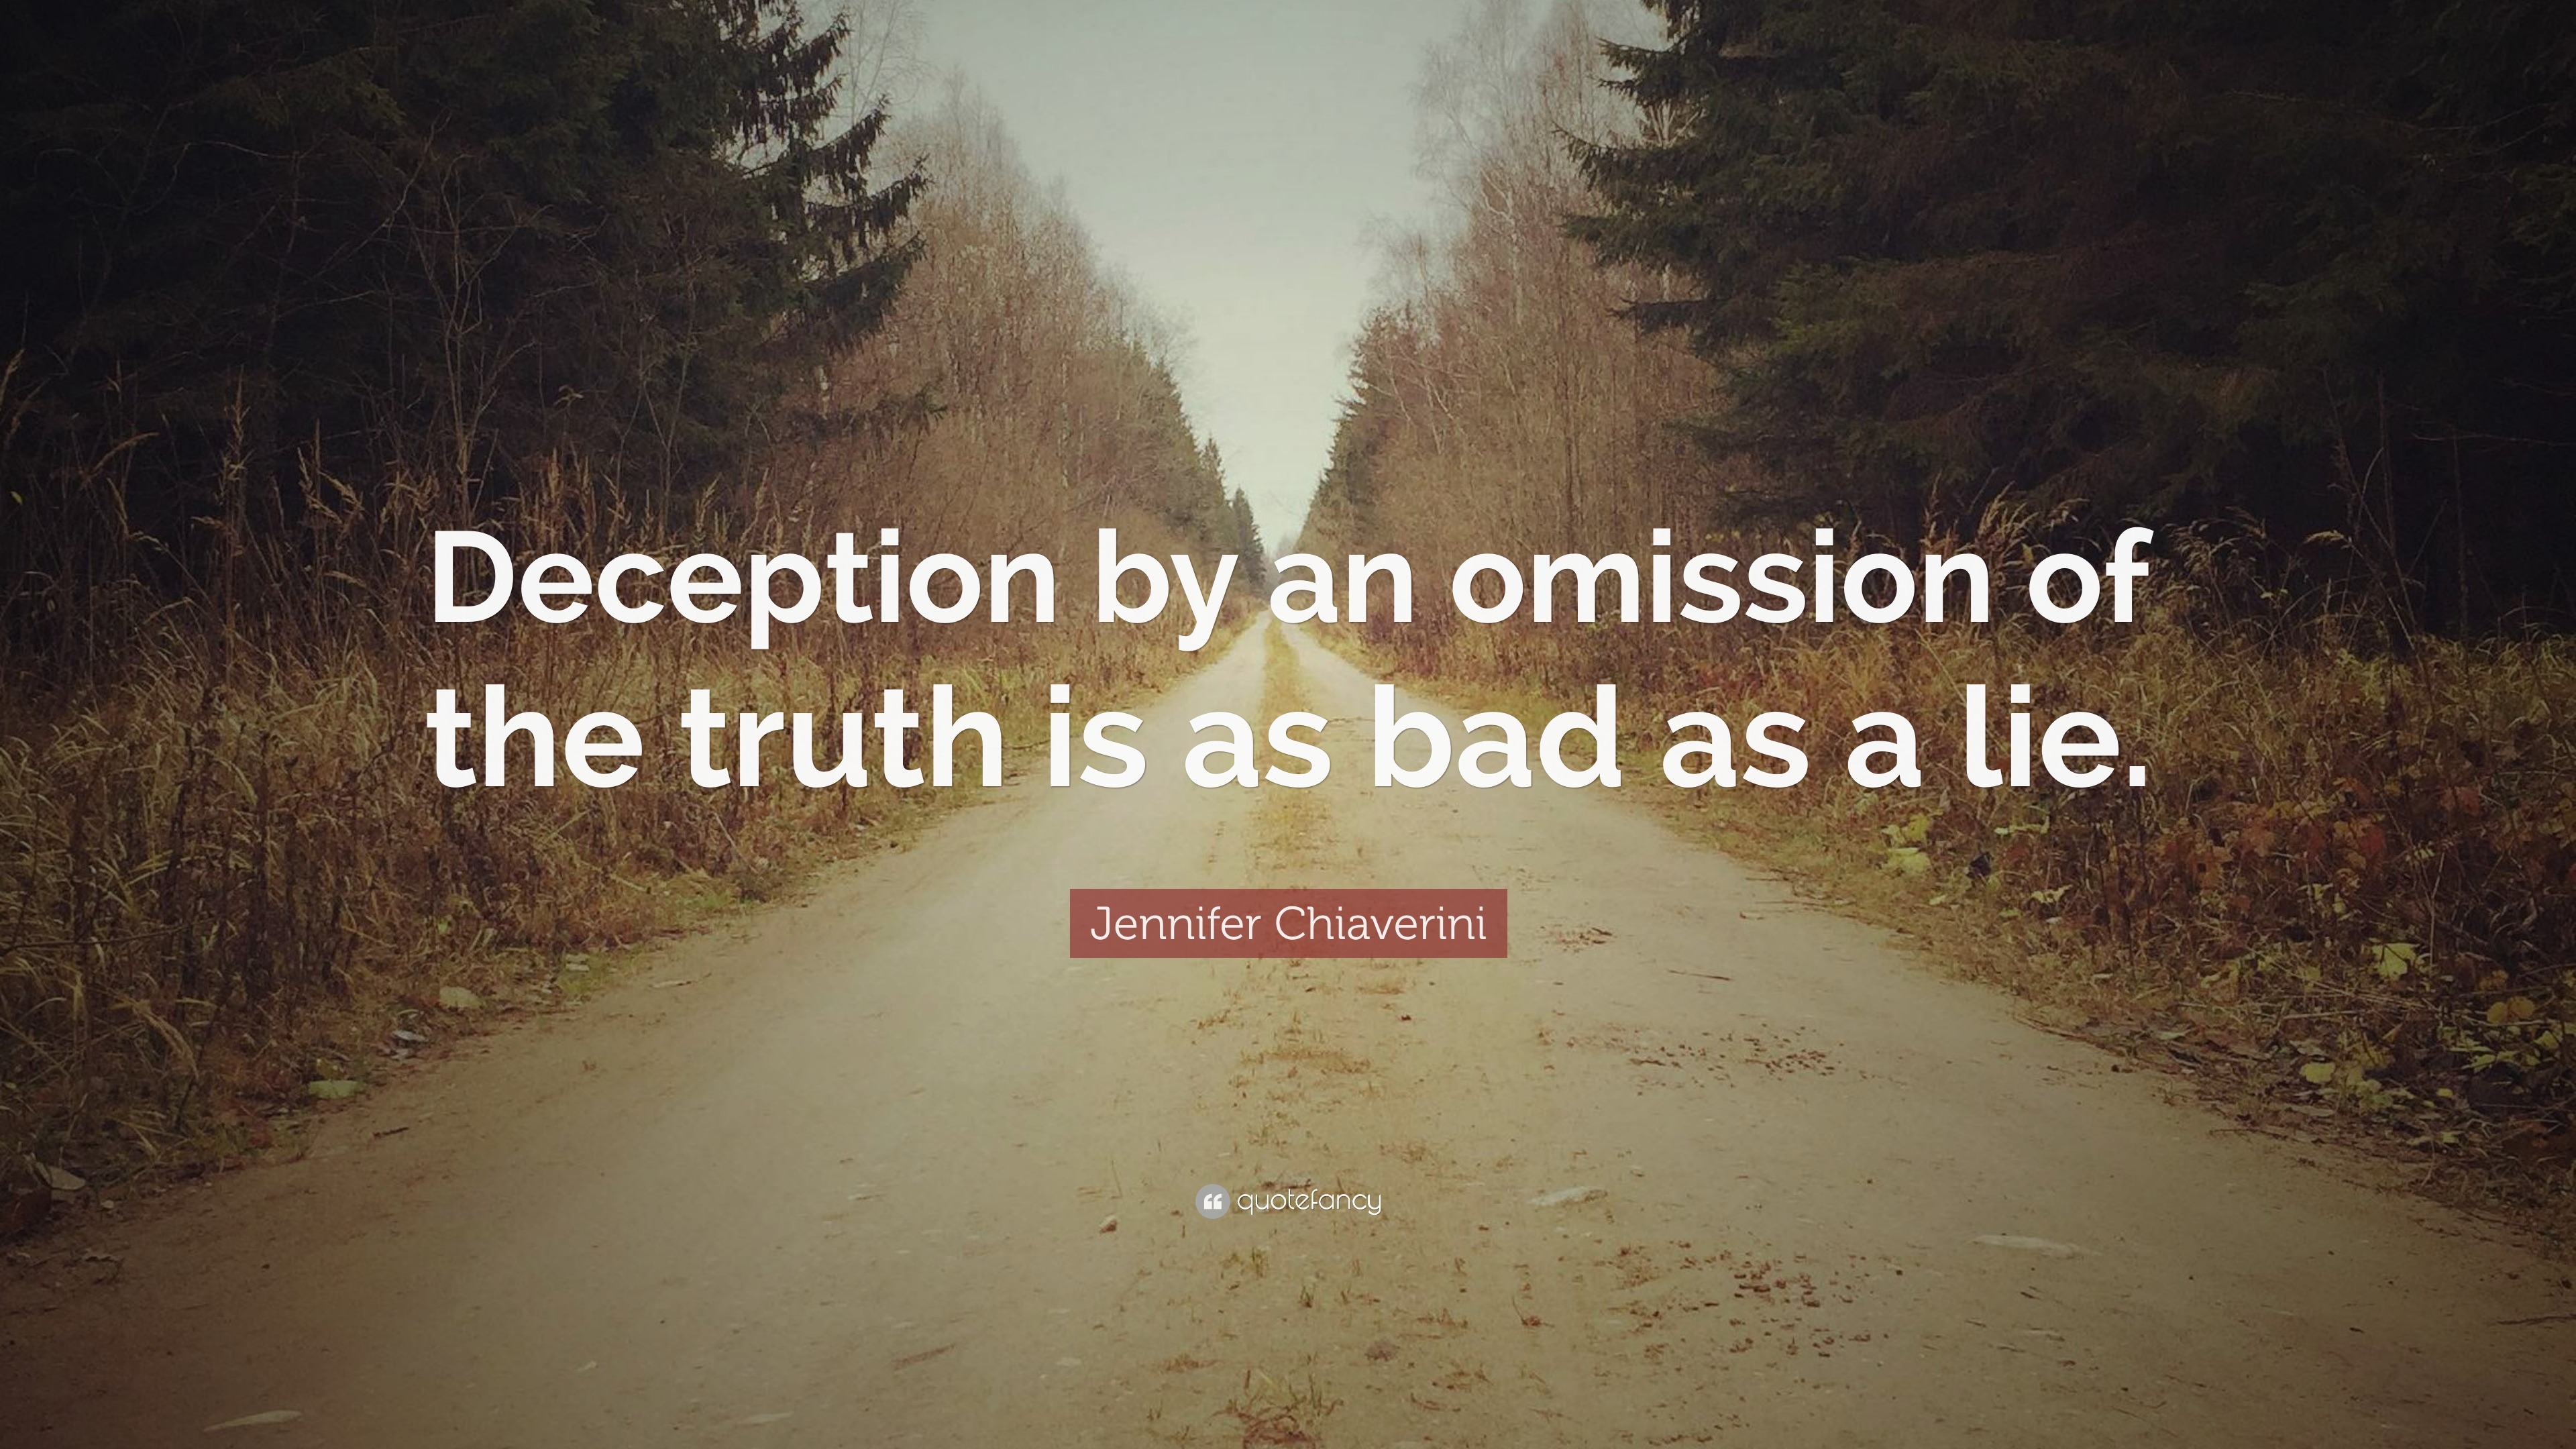 Jennifer Chiaverini Quote “deception By An Omission Of The Truth Is As